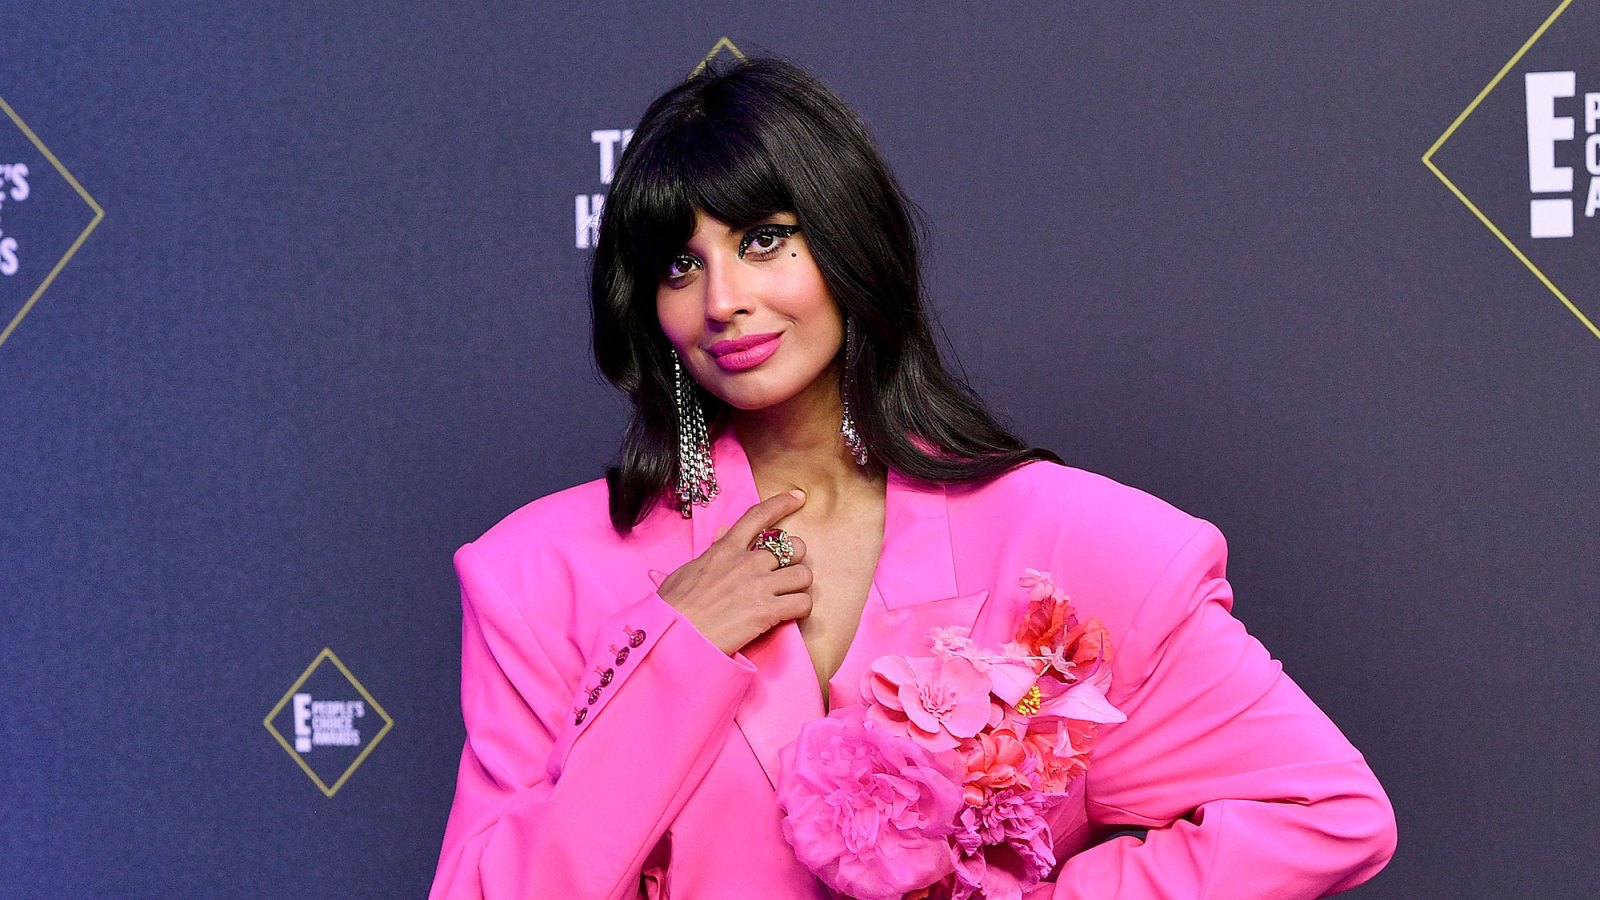 Jameela Jamil 25 Things You Don't Know About Me